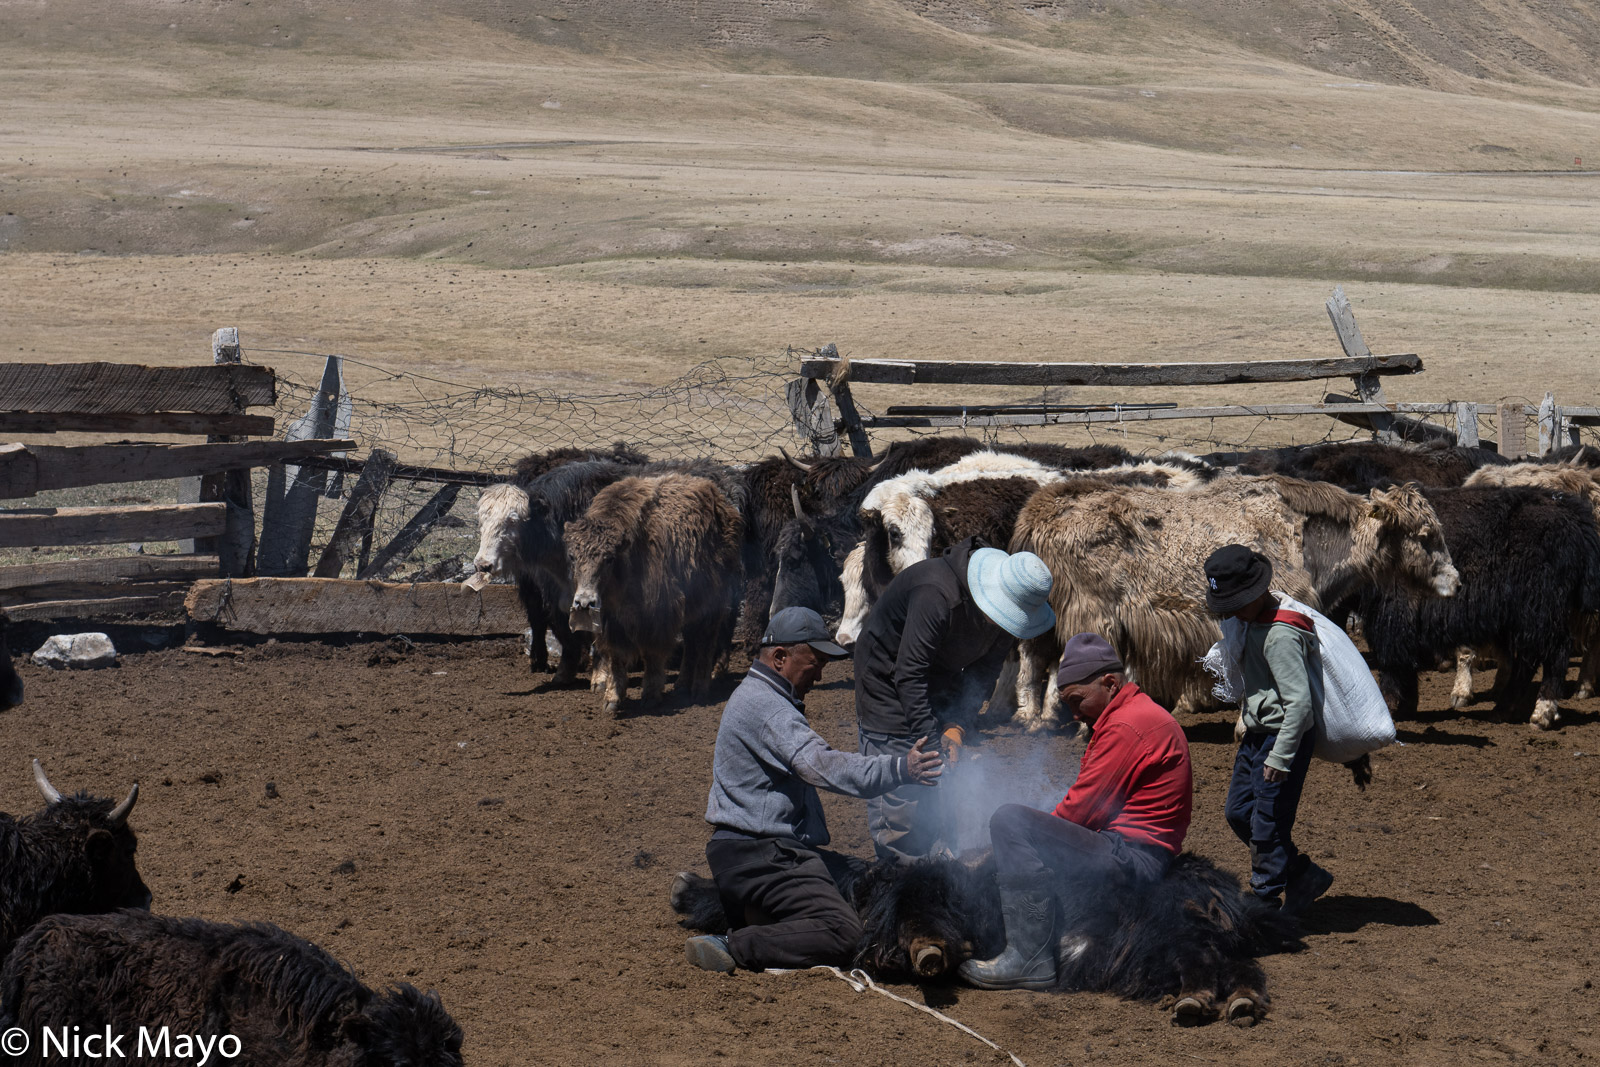 Branding a yak in the Ak Say valley of the Tien Shan mountains.